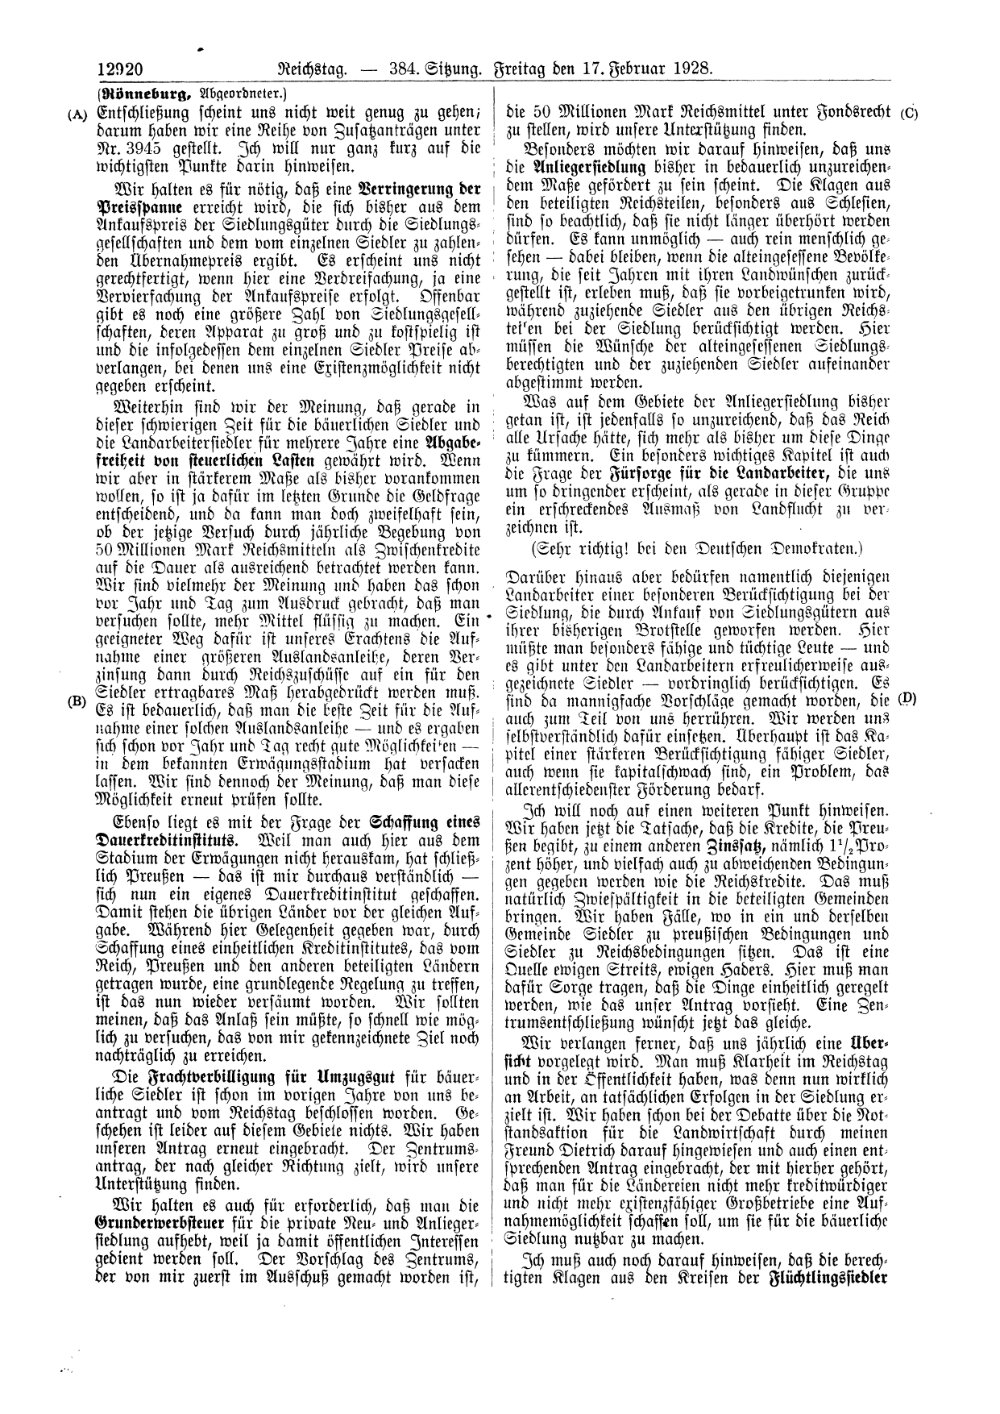 Scan of page 12920